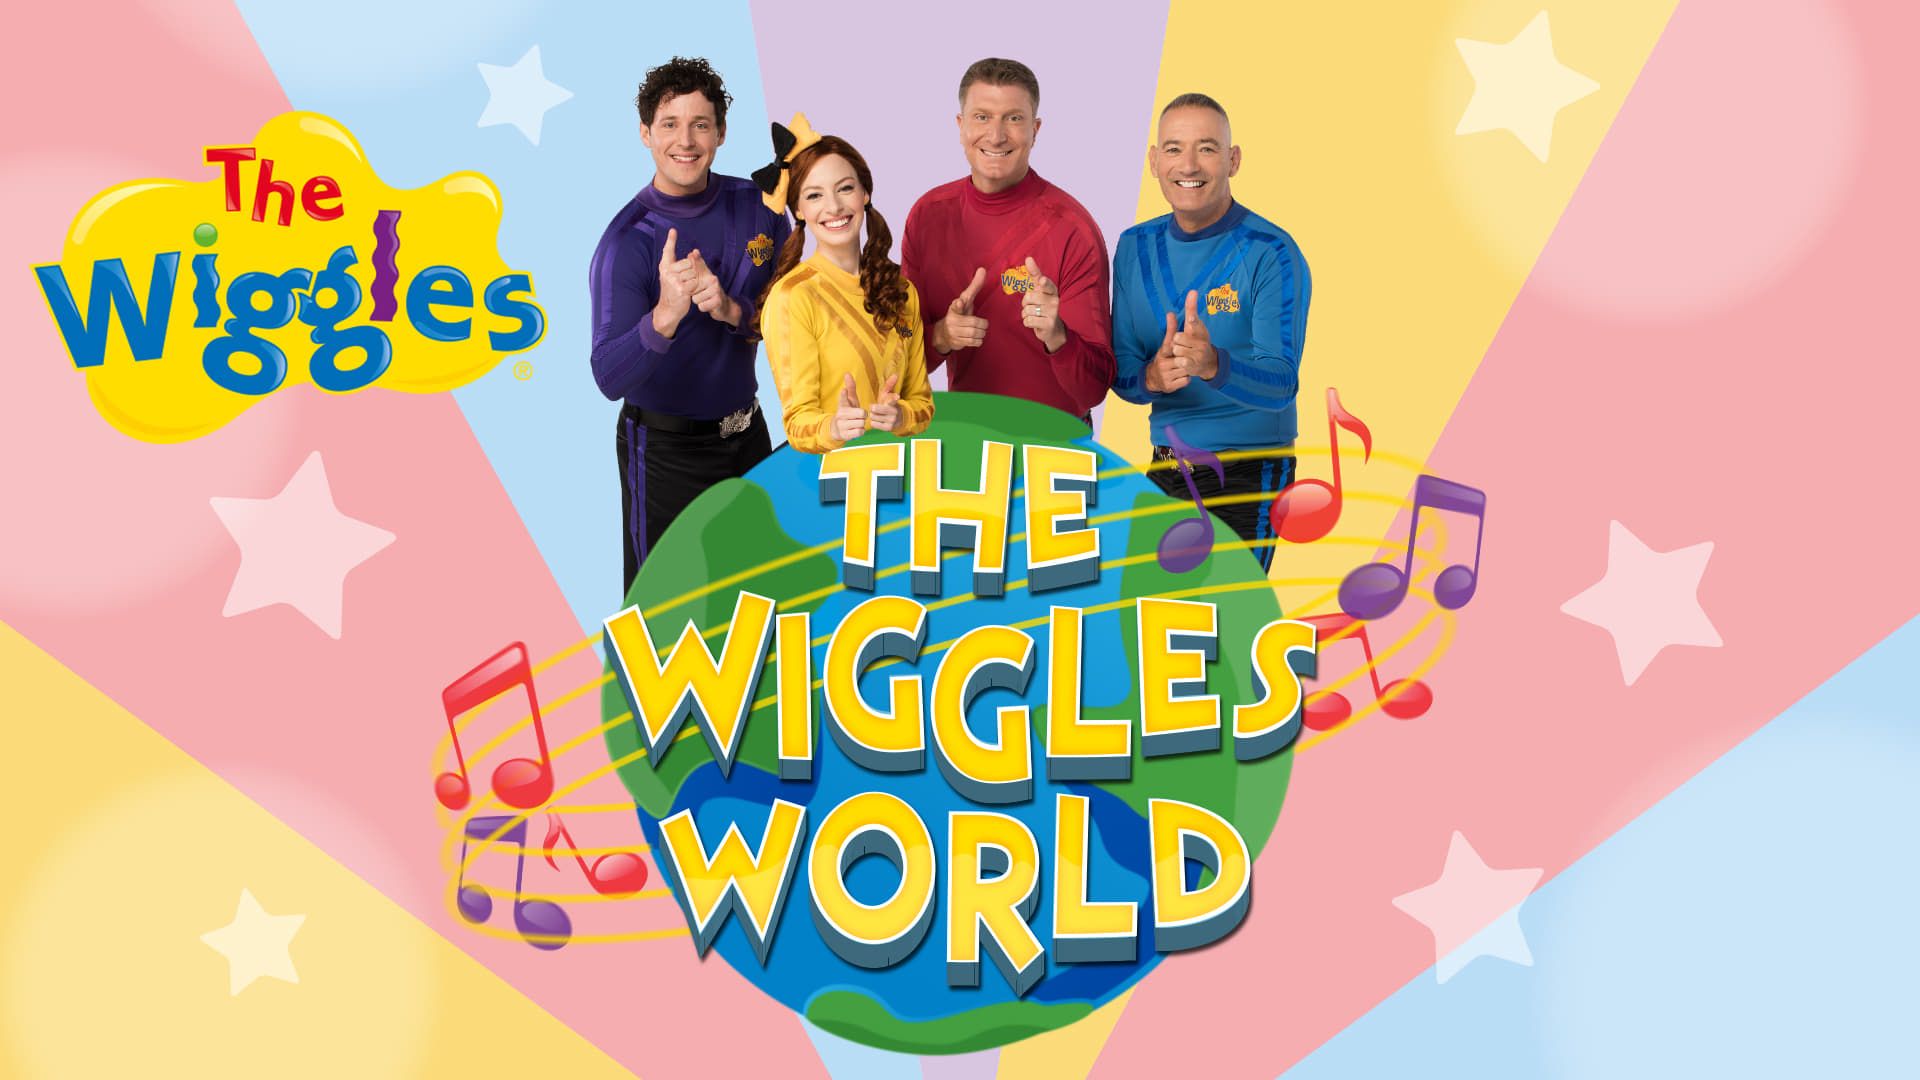 The Wiggles: The Wiggles World background